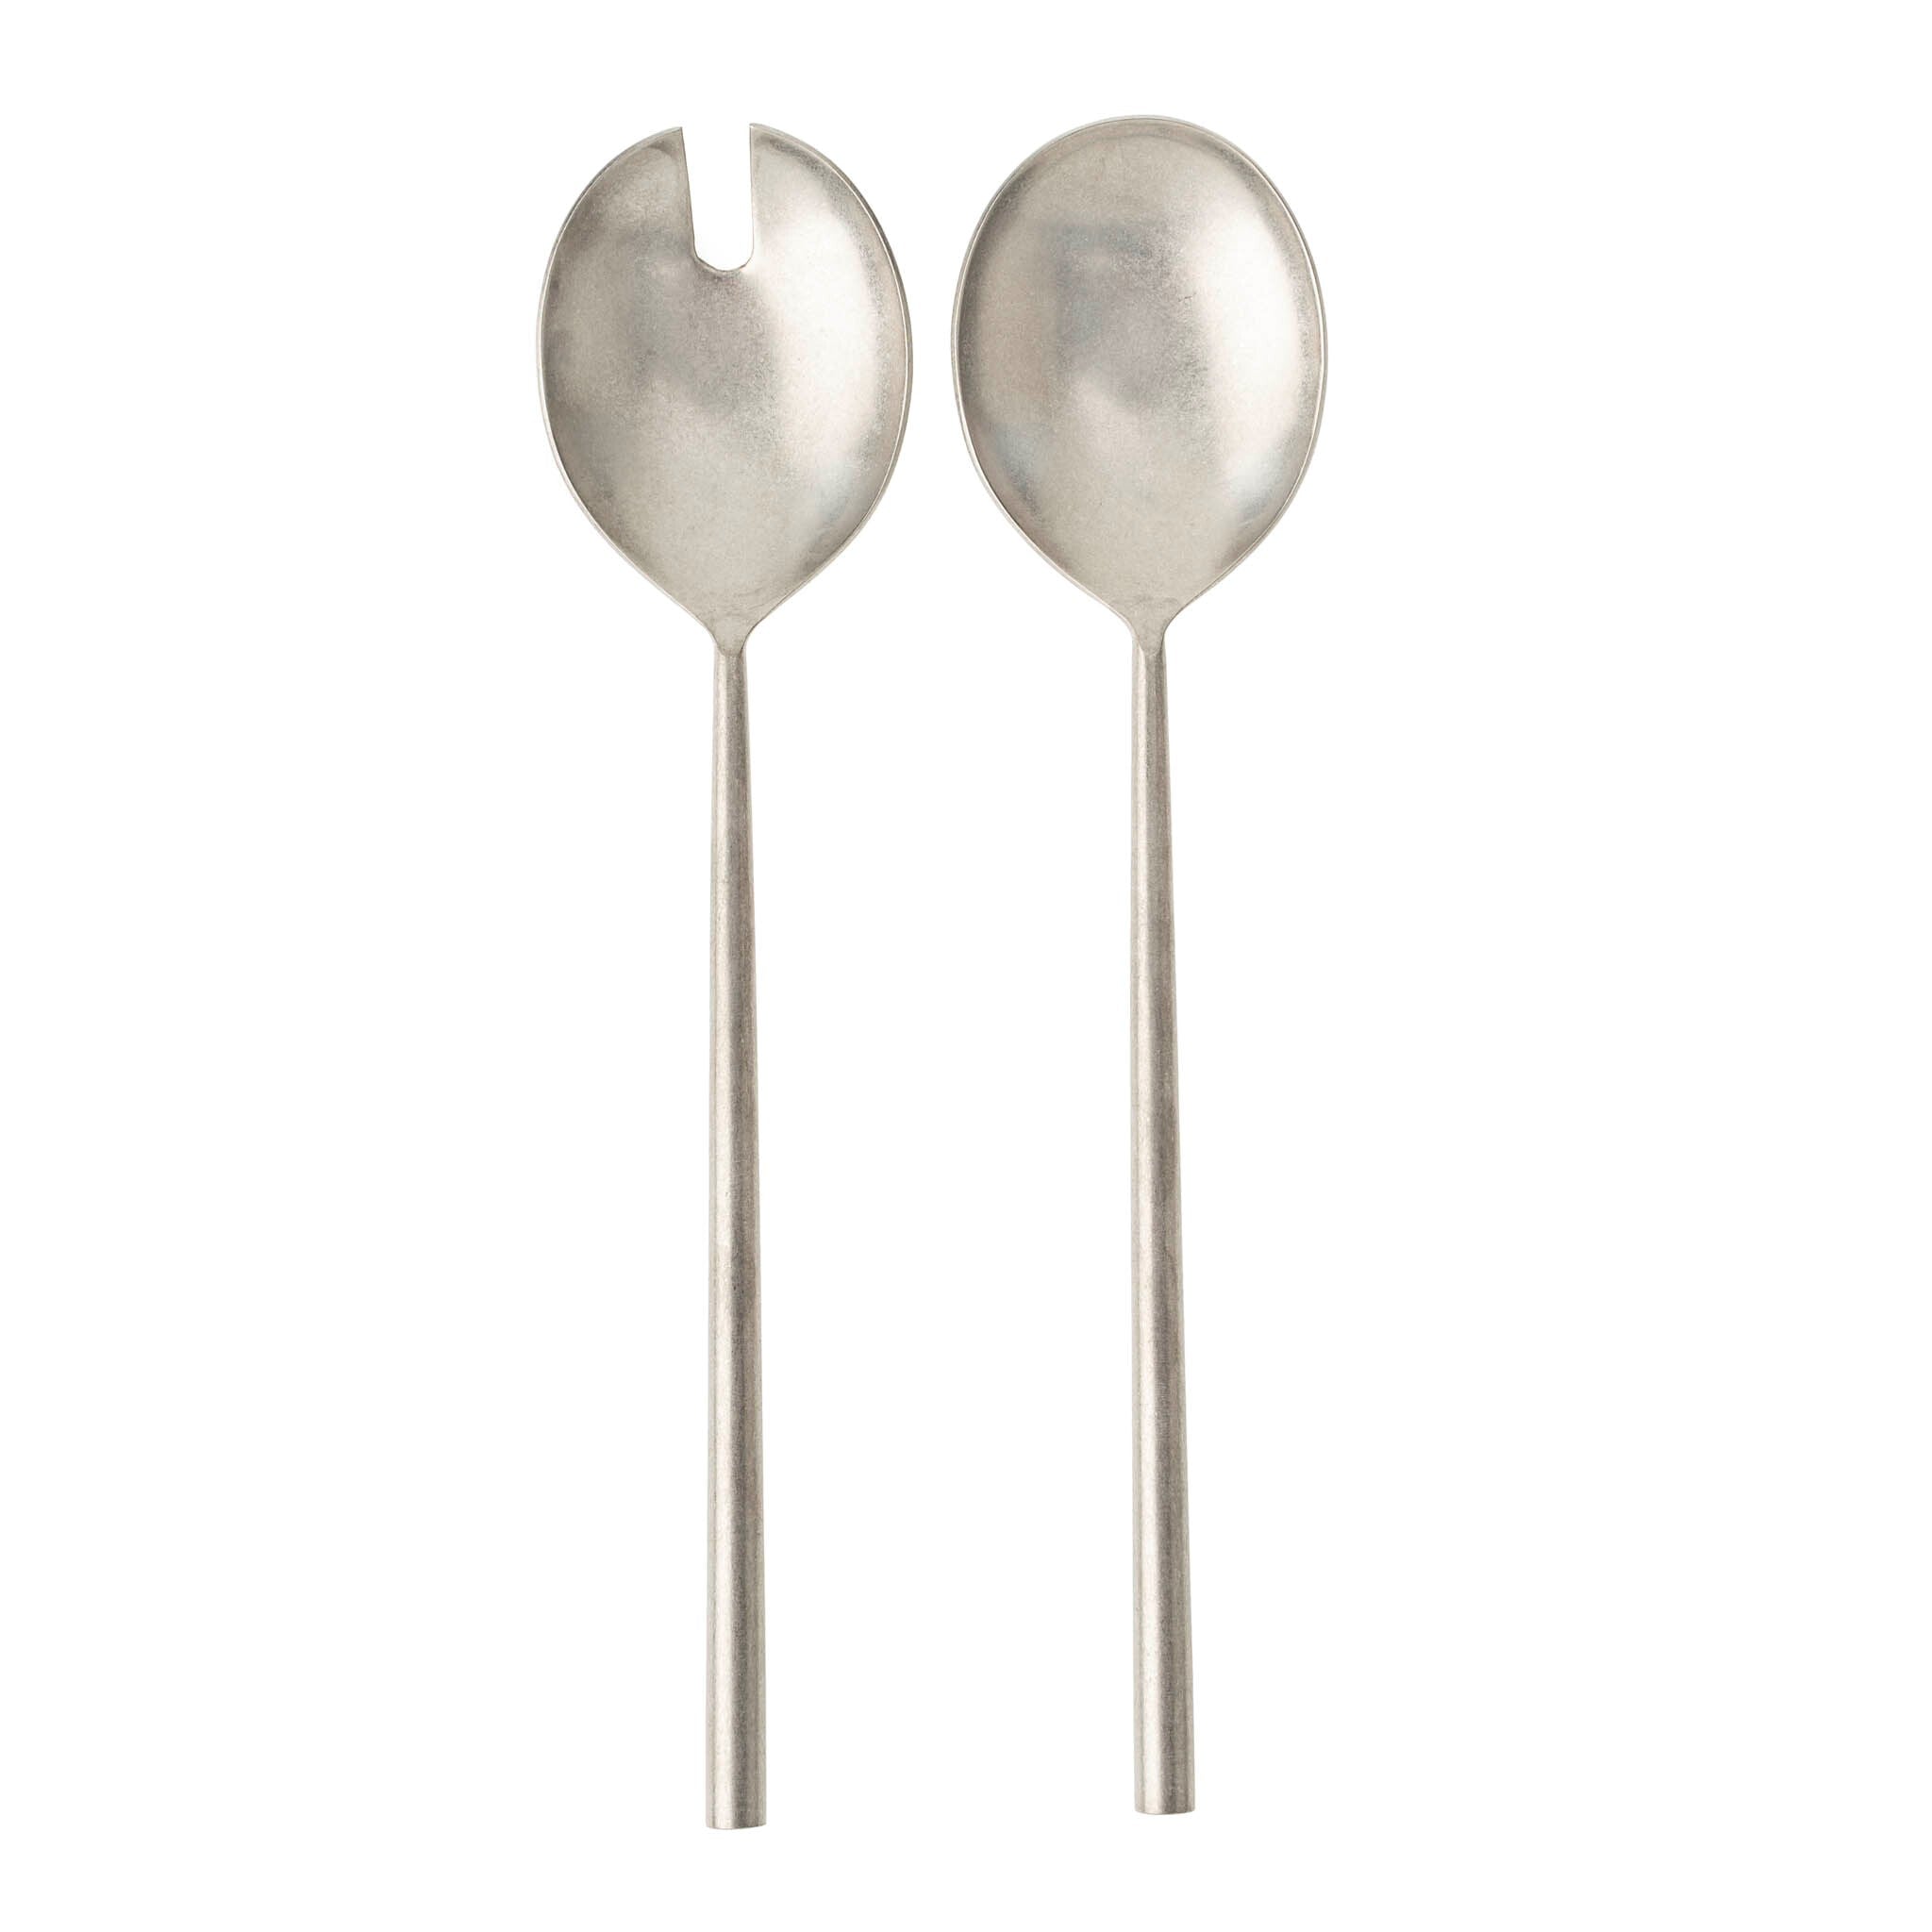 Tides Salad Servers Stainless